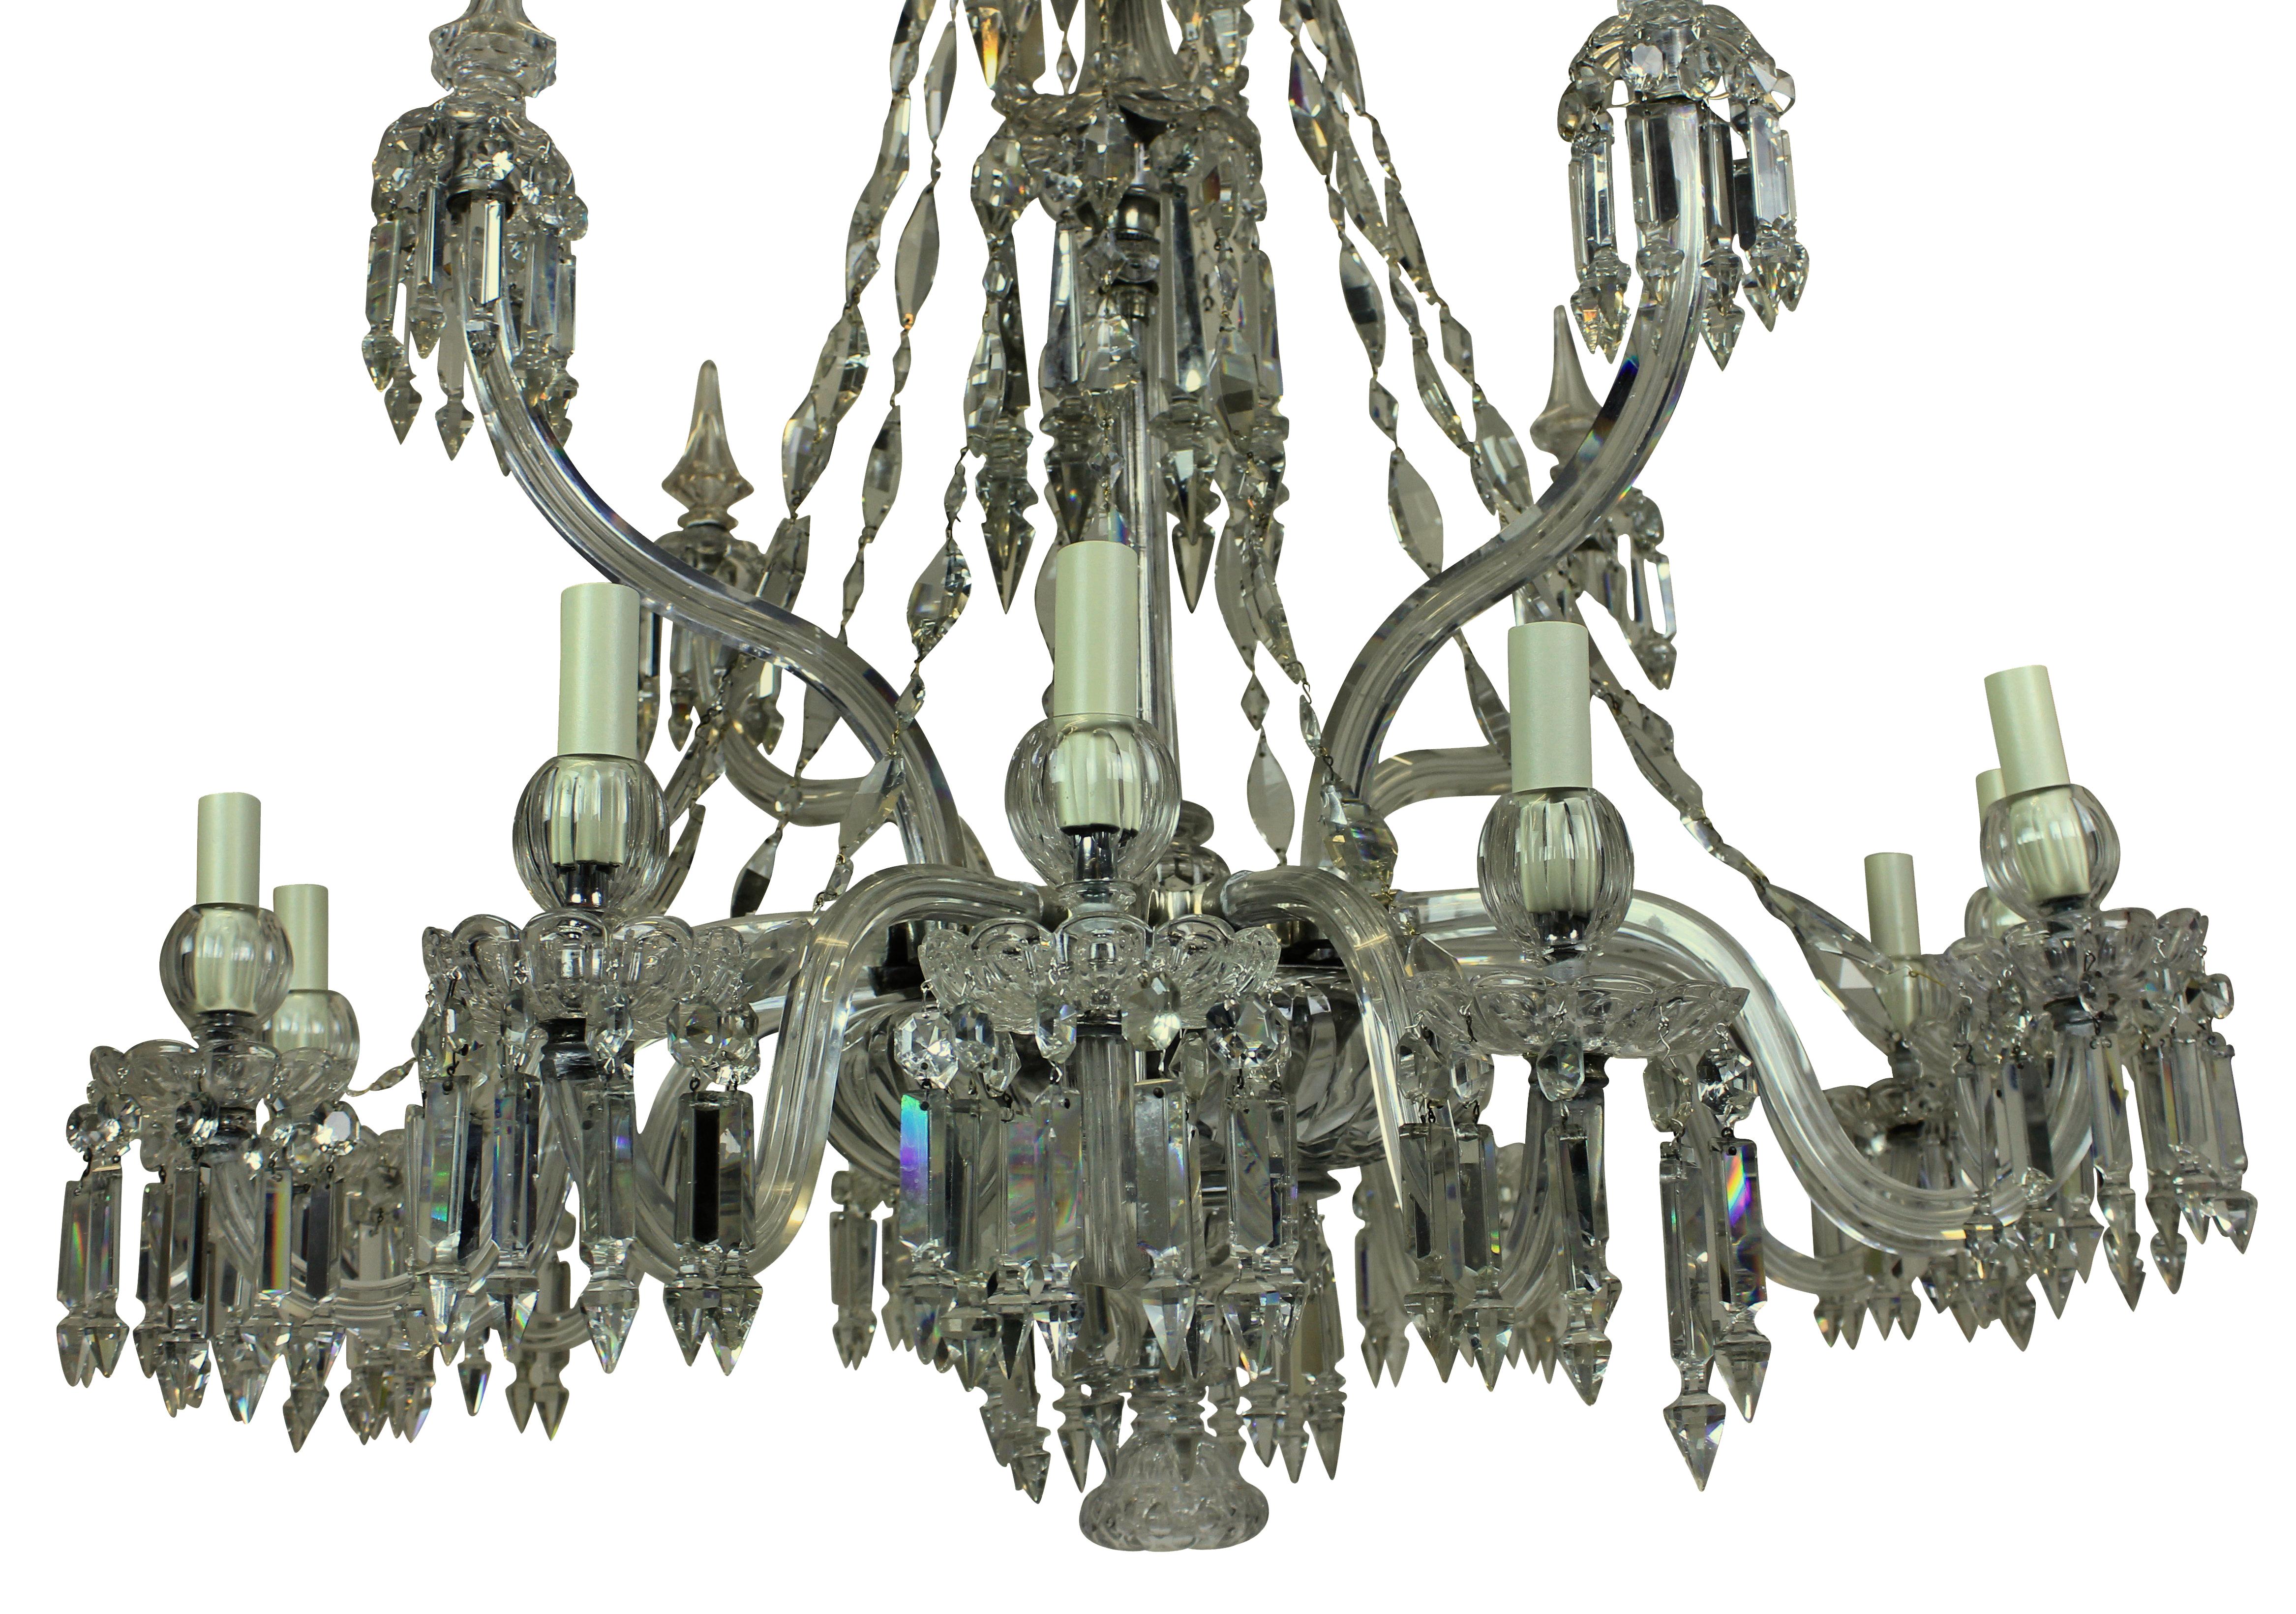 A fine English cut-glass chandelier by F & C Osler. Formerly a gasolier. With twelve arms hung throughout and four large up-swept arms with spikes. The chains of diamond shape are a unique Osler pattern.
  